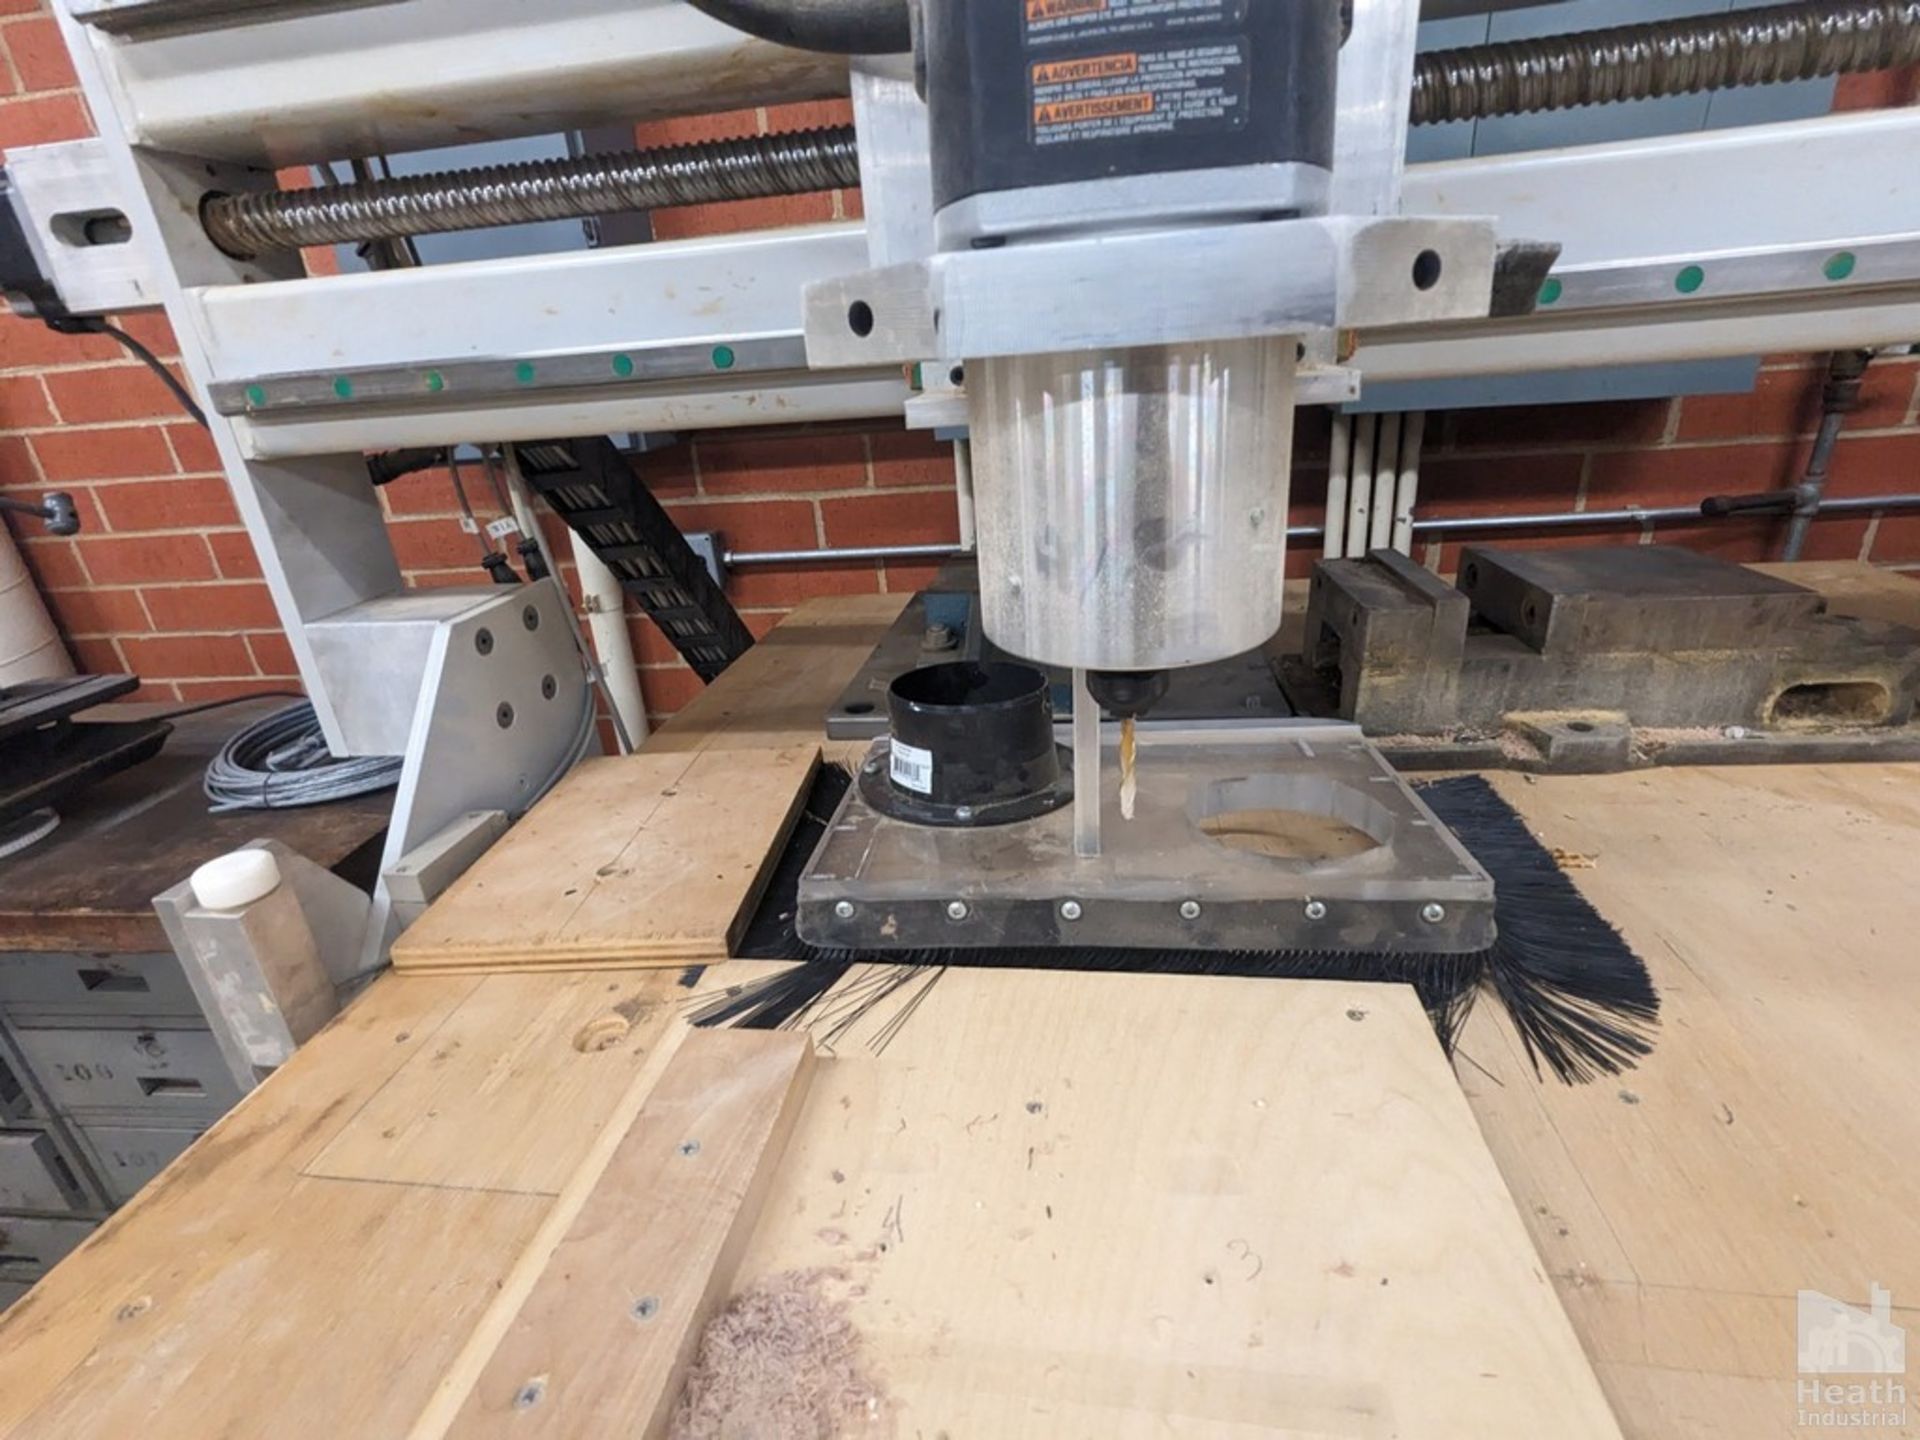 SABRE MODEL 3636 CNC WOOD ROUTER WITH PORTABLE TABLE Loading Fee :$100 - Image 4 of 6